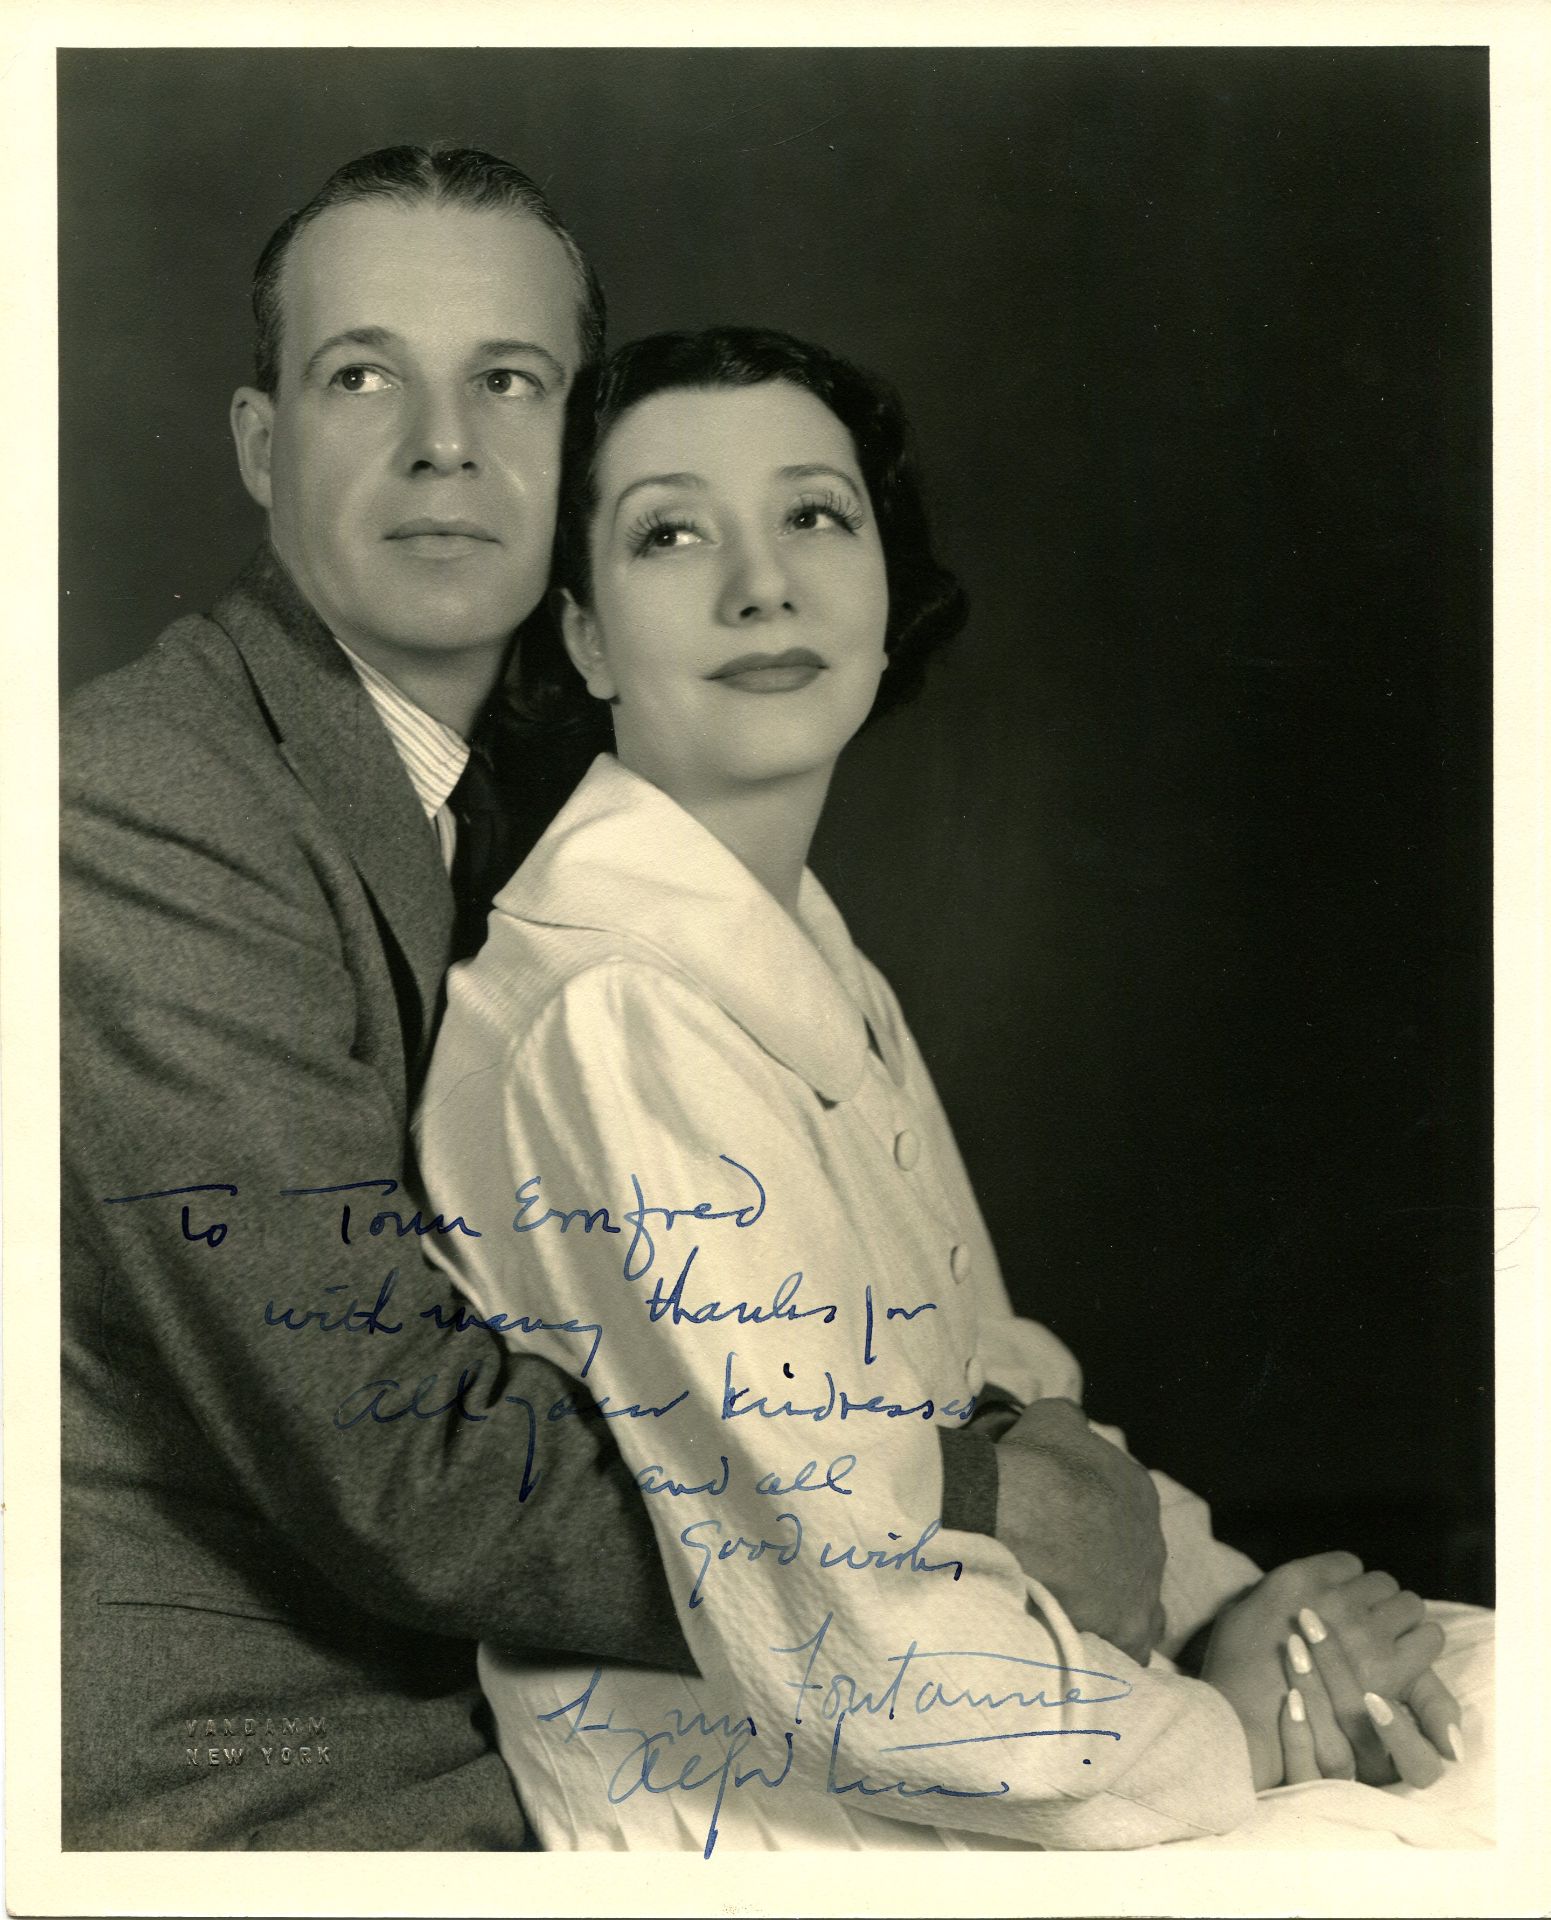 LUNT & FONTANNE: LUNT ALFRED (1892-1977) American actor & FONTANNE LYNN (1887-1983) English actress,